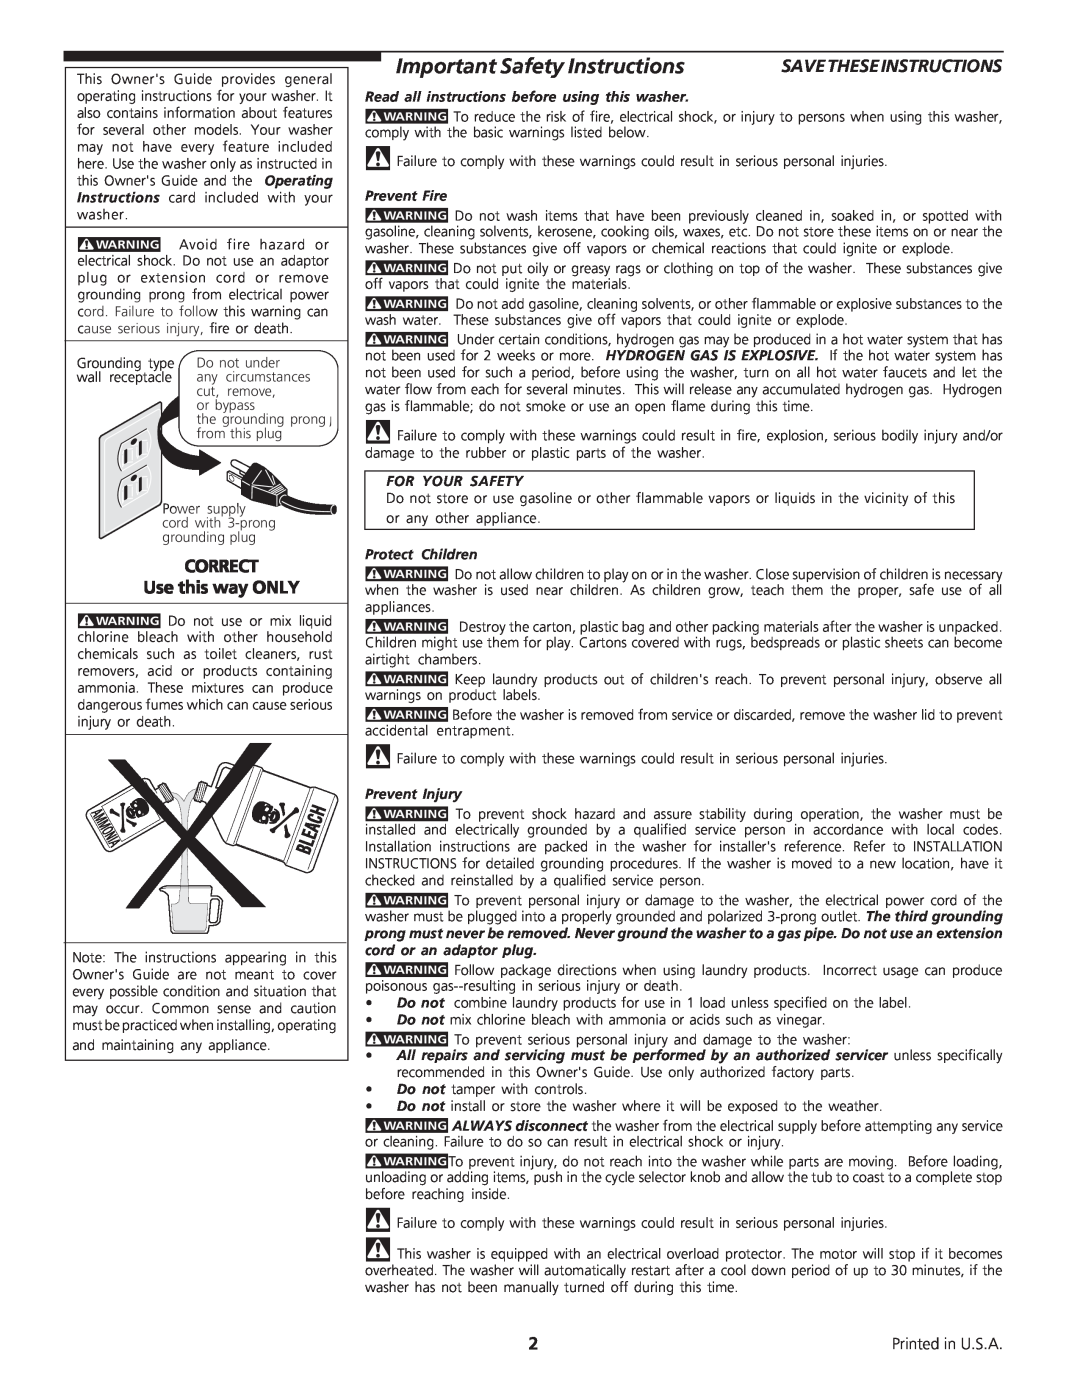 Frigidaire 134670900 Important Safety Instructions, CORRECT Use this way ONLY, Grounding type, Do nott u nder, or by pass 